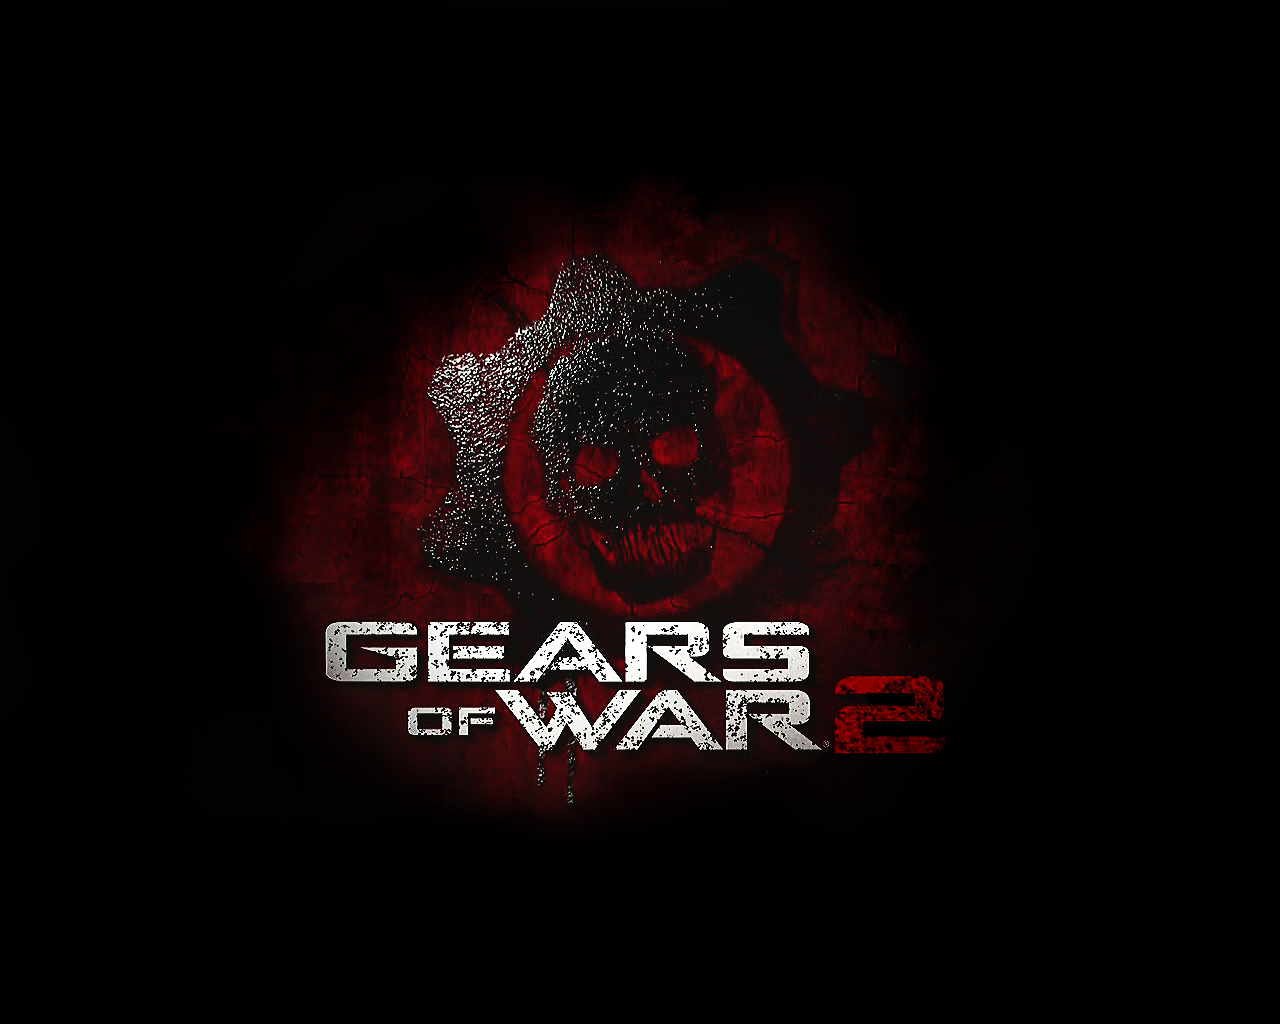 Popular Gears Of War 2 Image for Phone